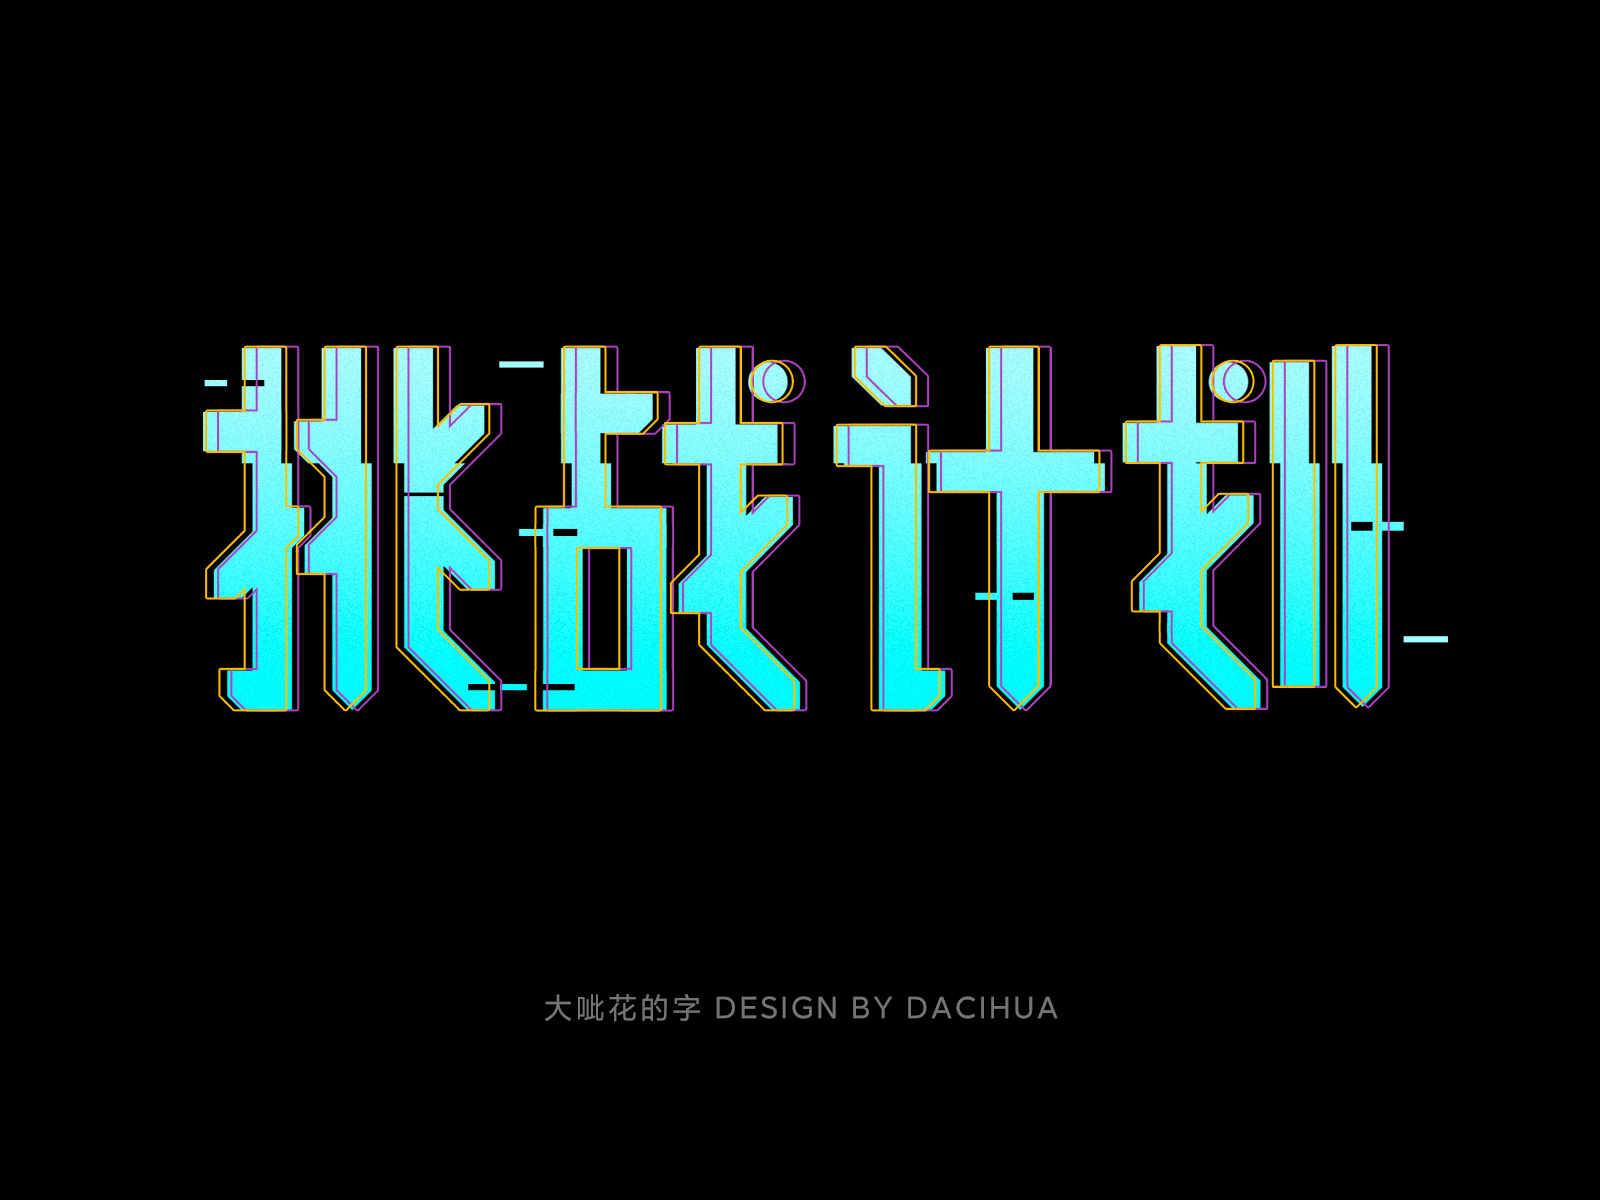 Chinese character font design by Dacihua on Dribbble